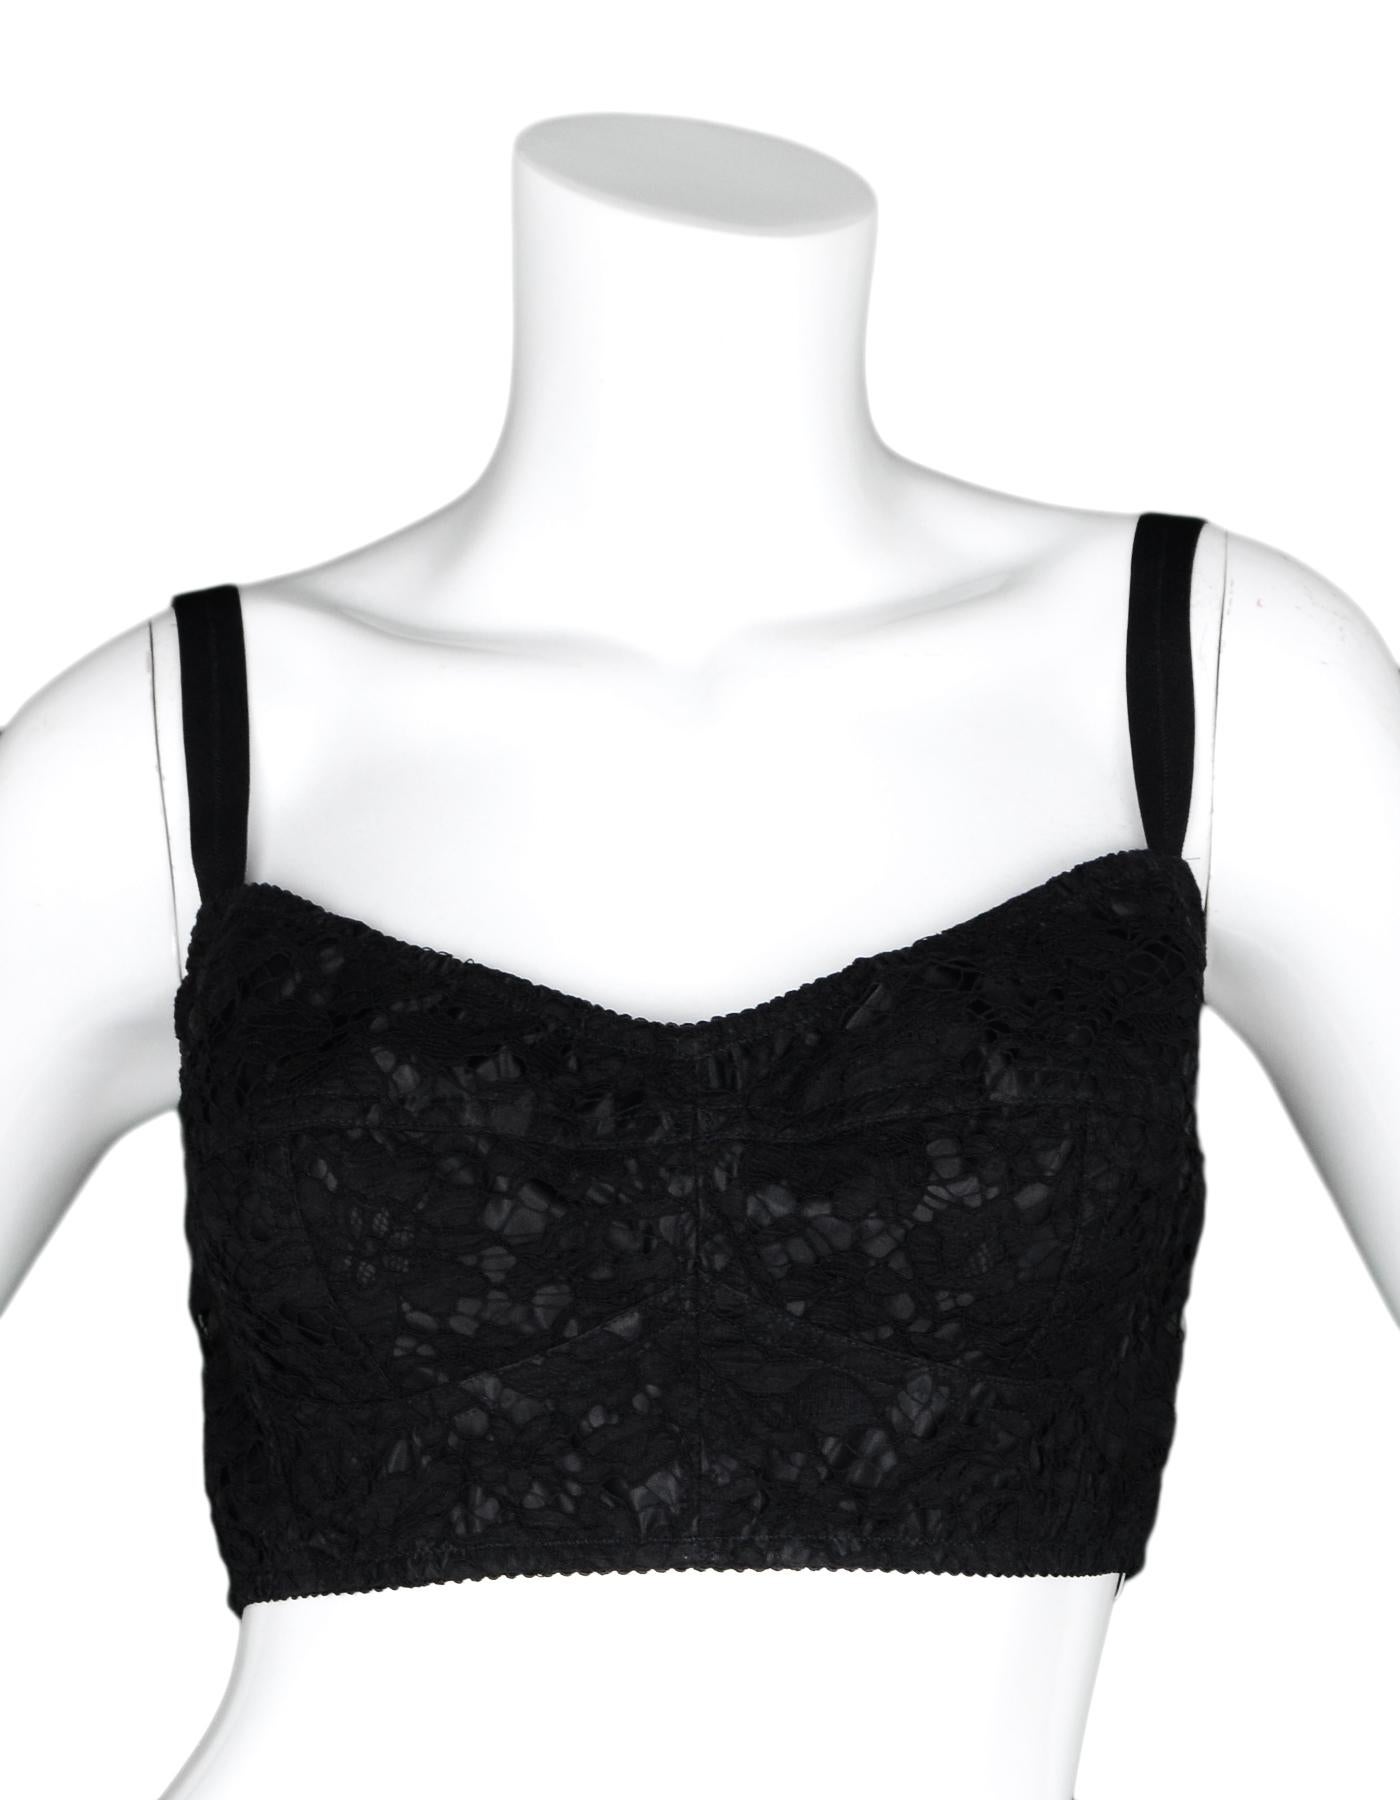 Dolce & Gabbana NWT Black Lace Bralette Bra Sz 44

Made In: Italy
Color: Black
Materials: 50% silk, 31% cotton, 15% rayon, 3% nylon, 1% other fibers
Opening/Closure: Row of three clasps at back
Overall Condition: New with tags
Estimated Retail: $600